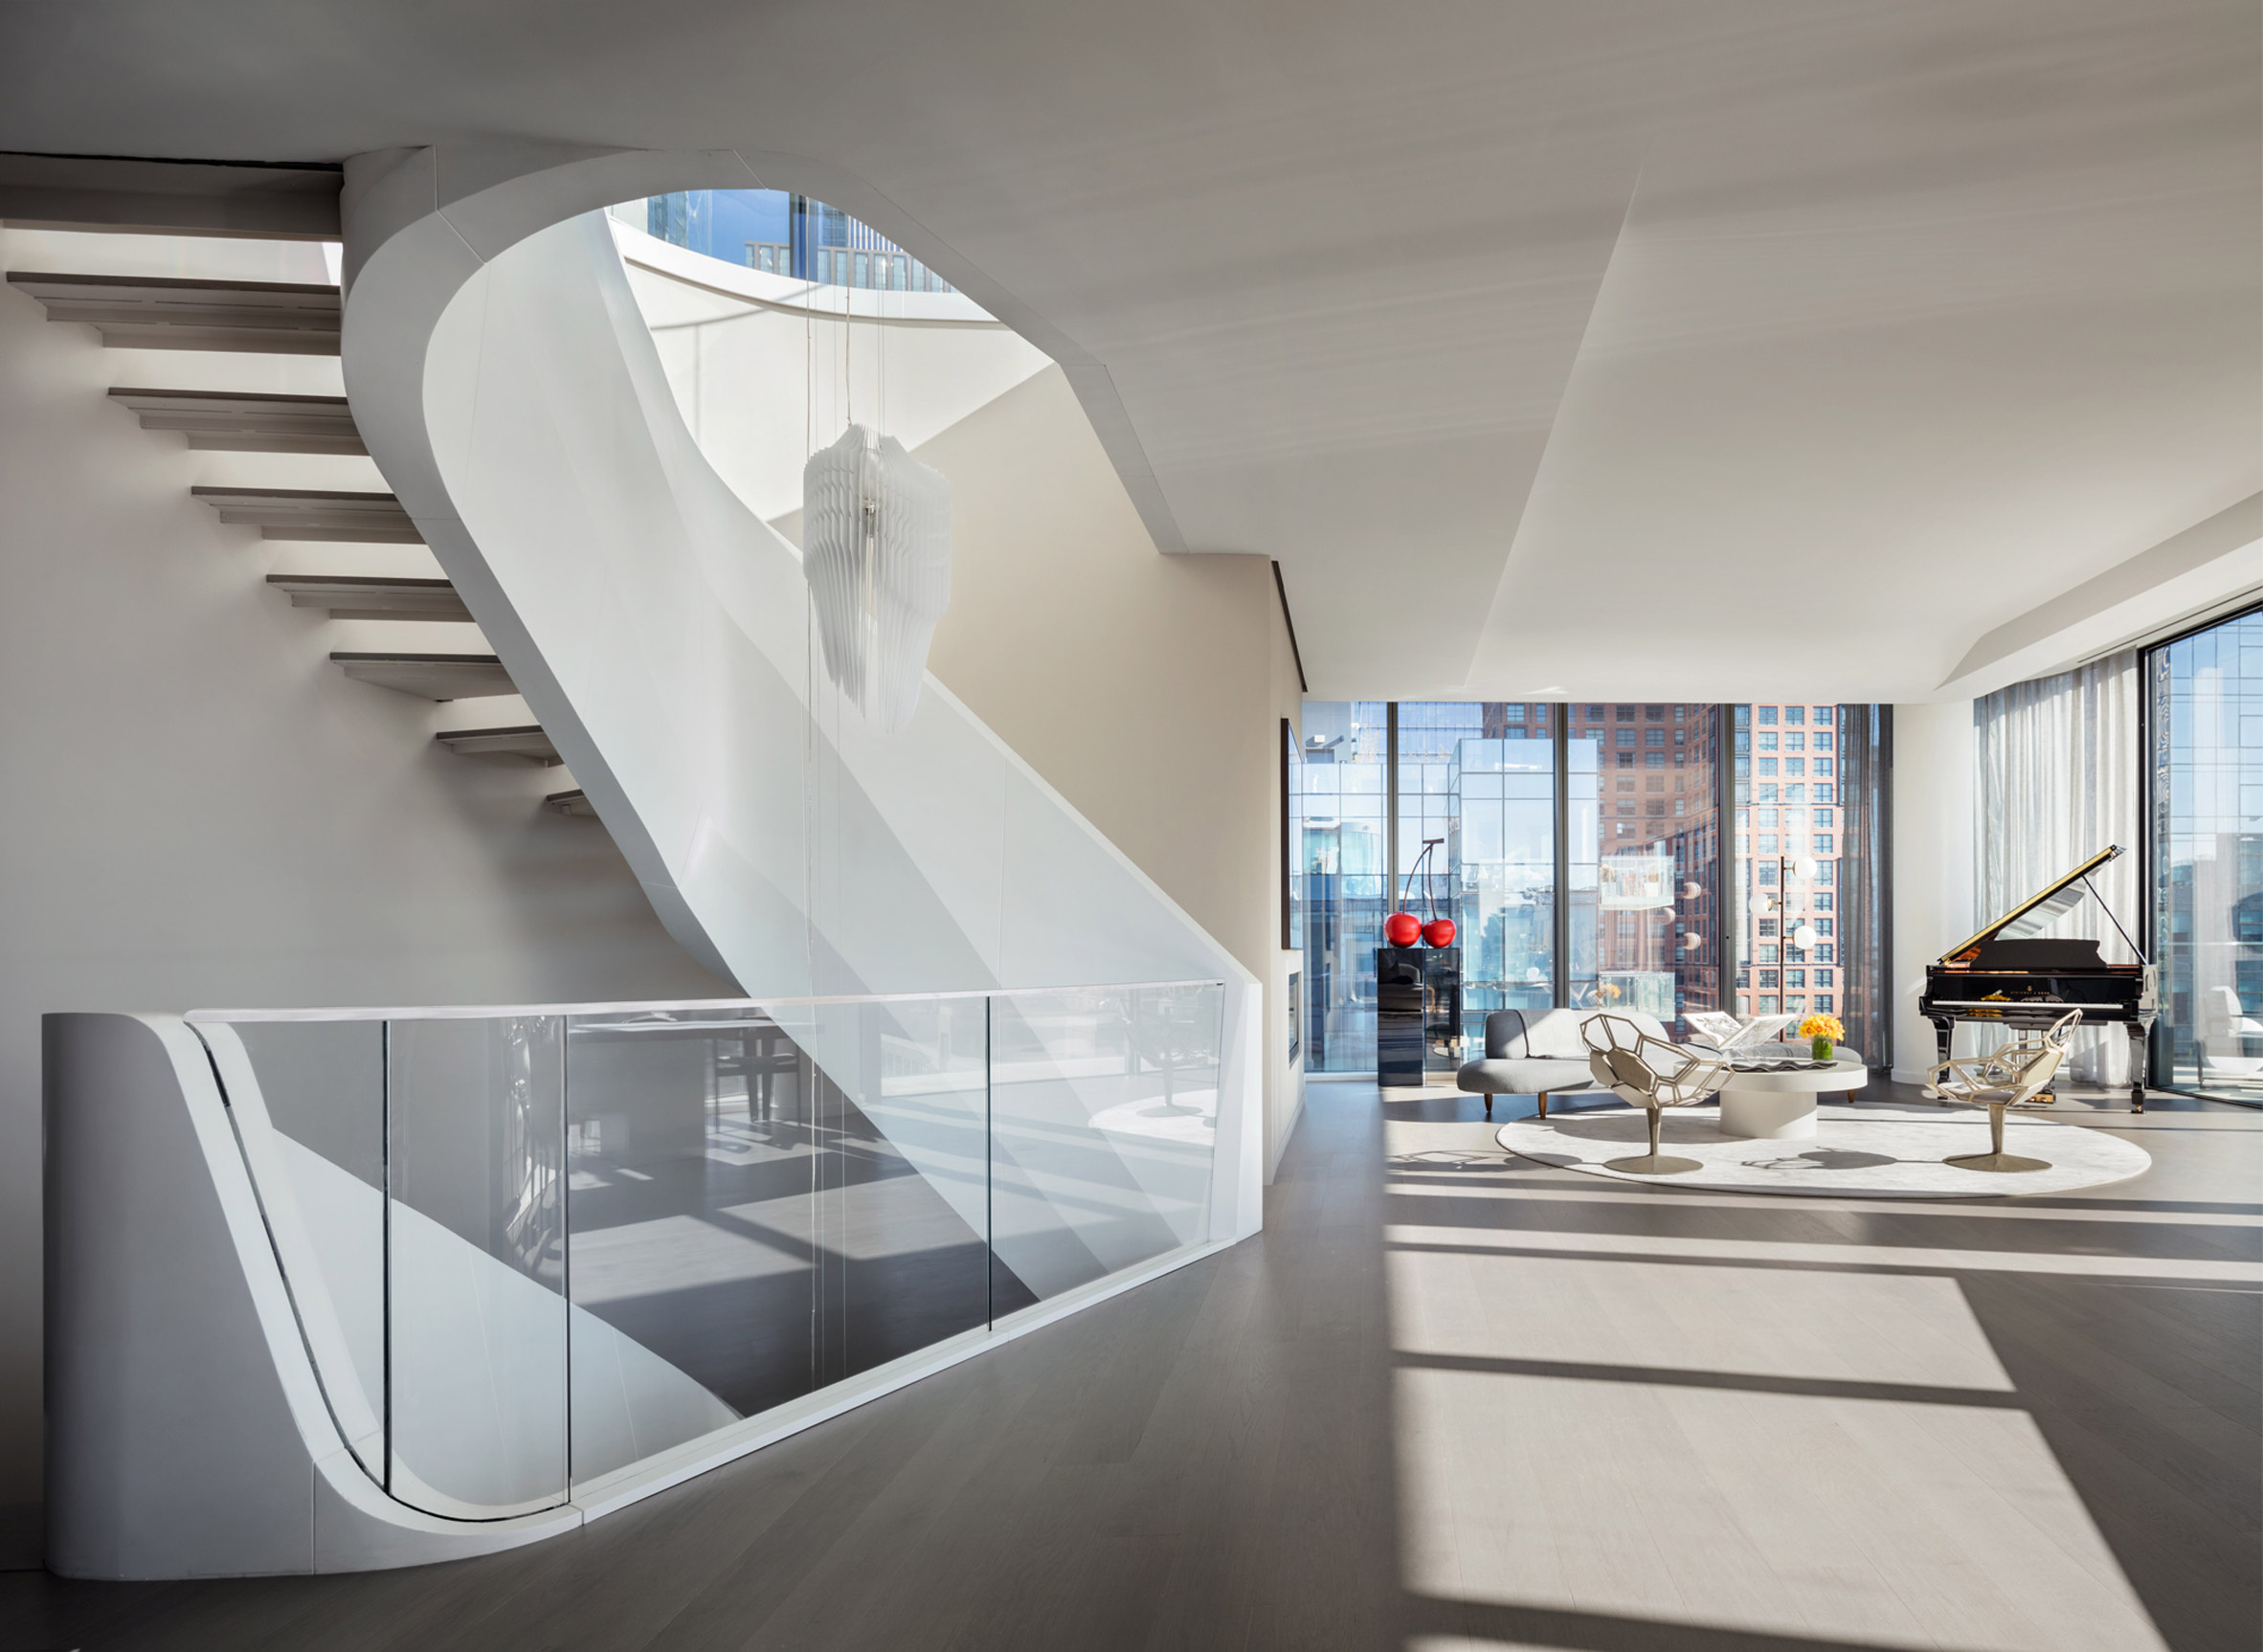 $50 million penthouse in Zaha Hadid's 520 West 28th revealed in new photos